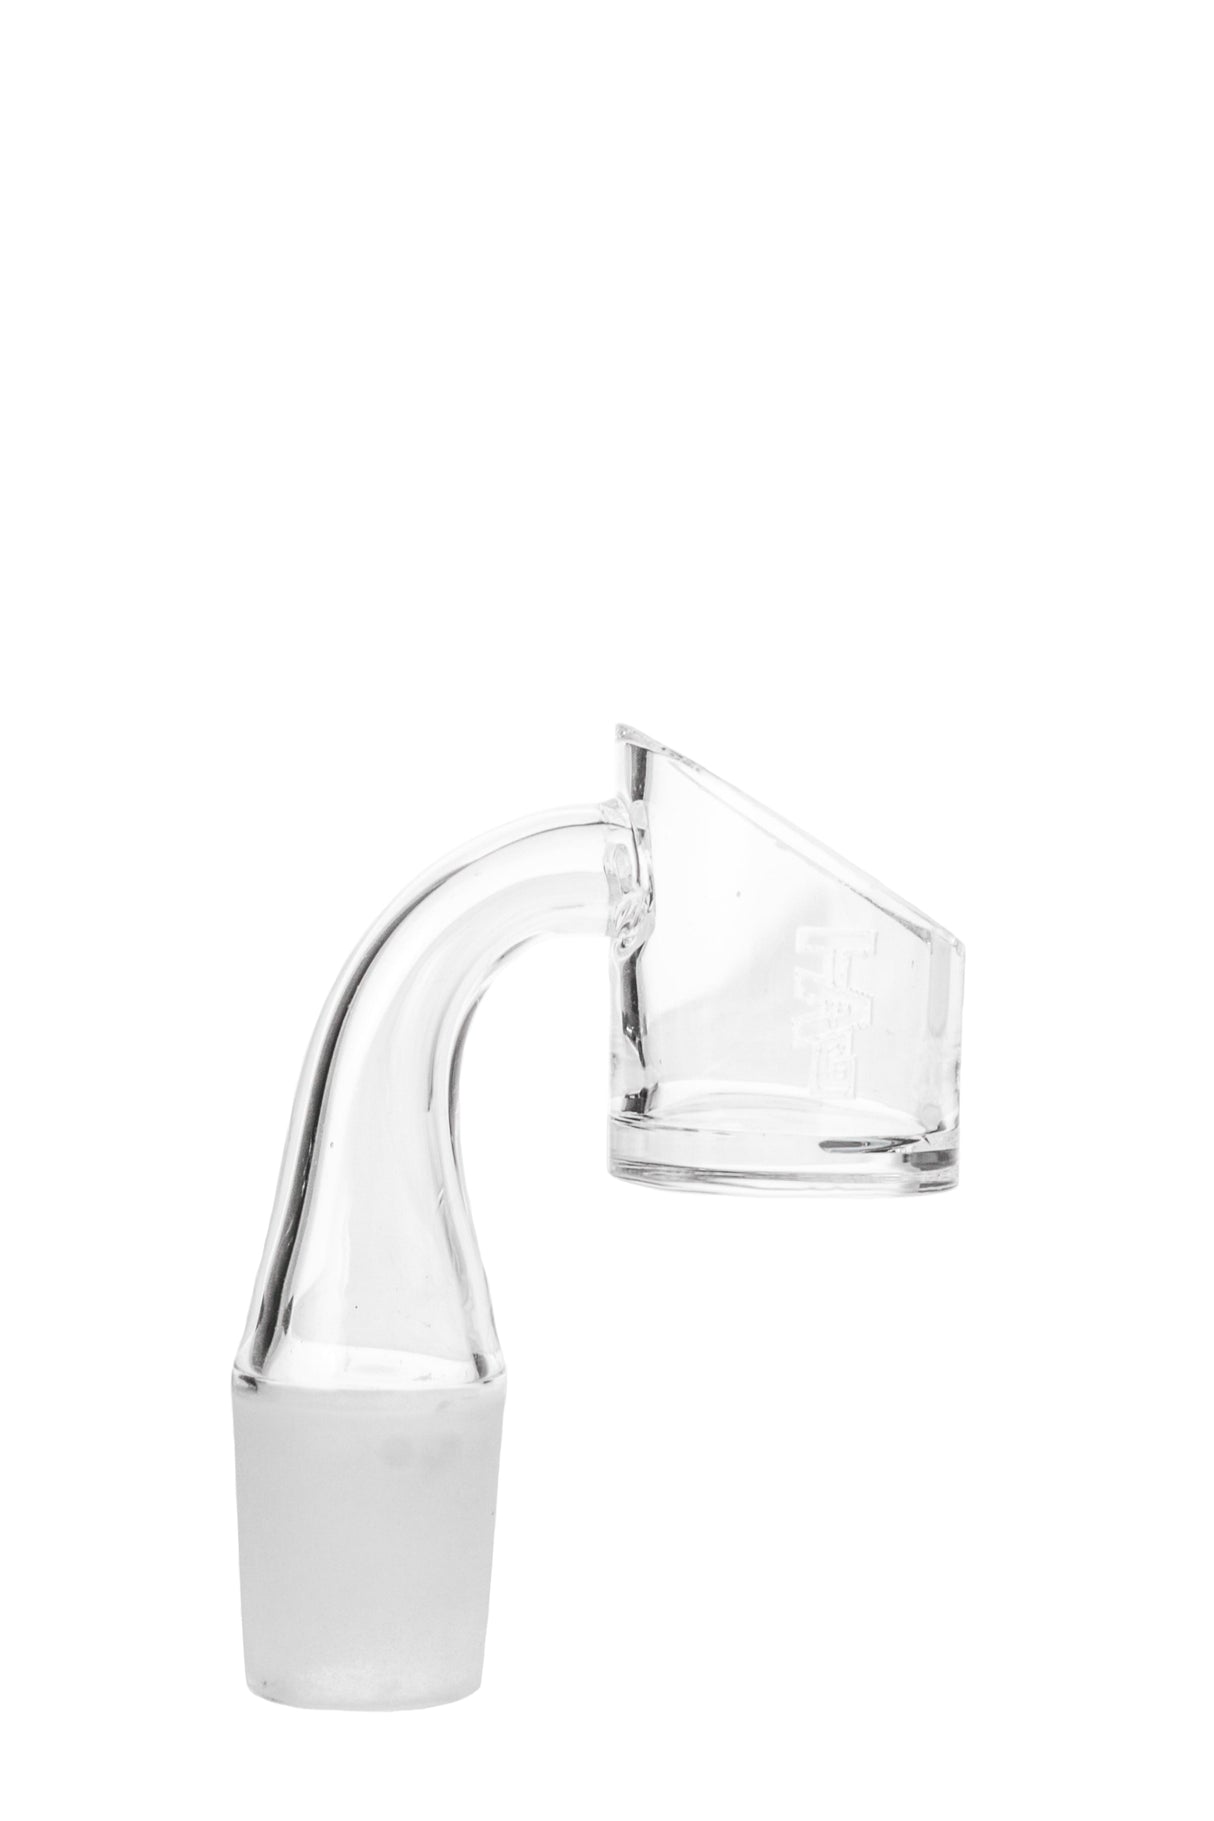 TAG Quartz Banger with High Air Flow, 18MM Male Joint, Laser Engraved Logo, Side View on White